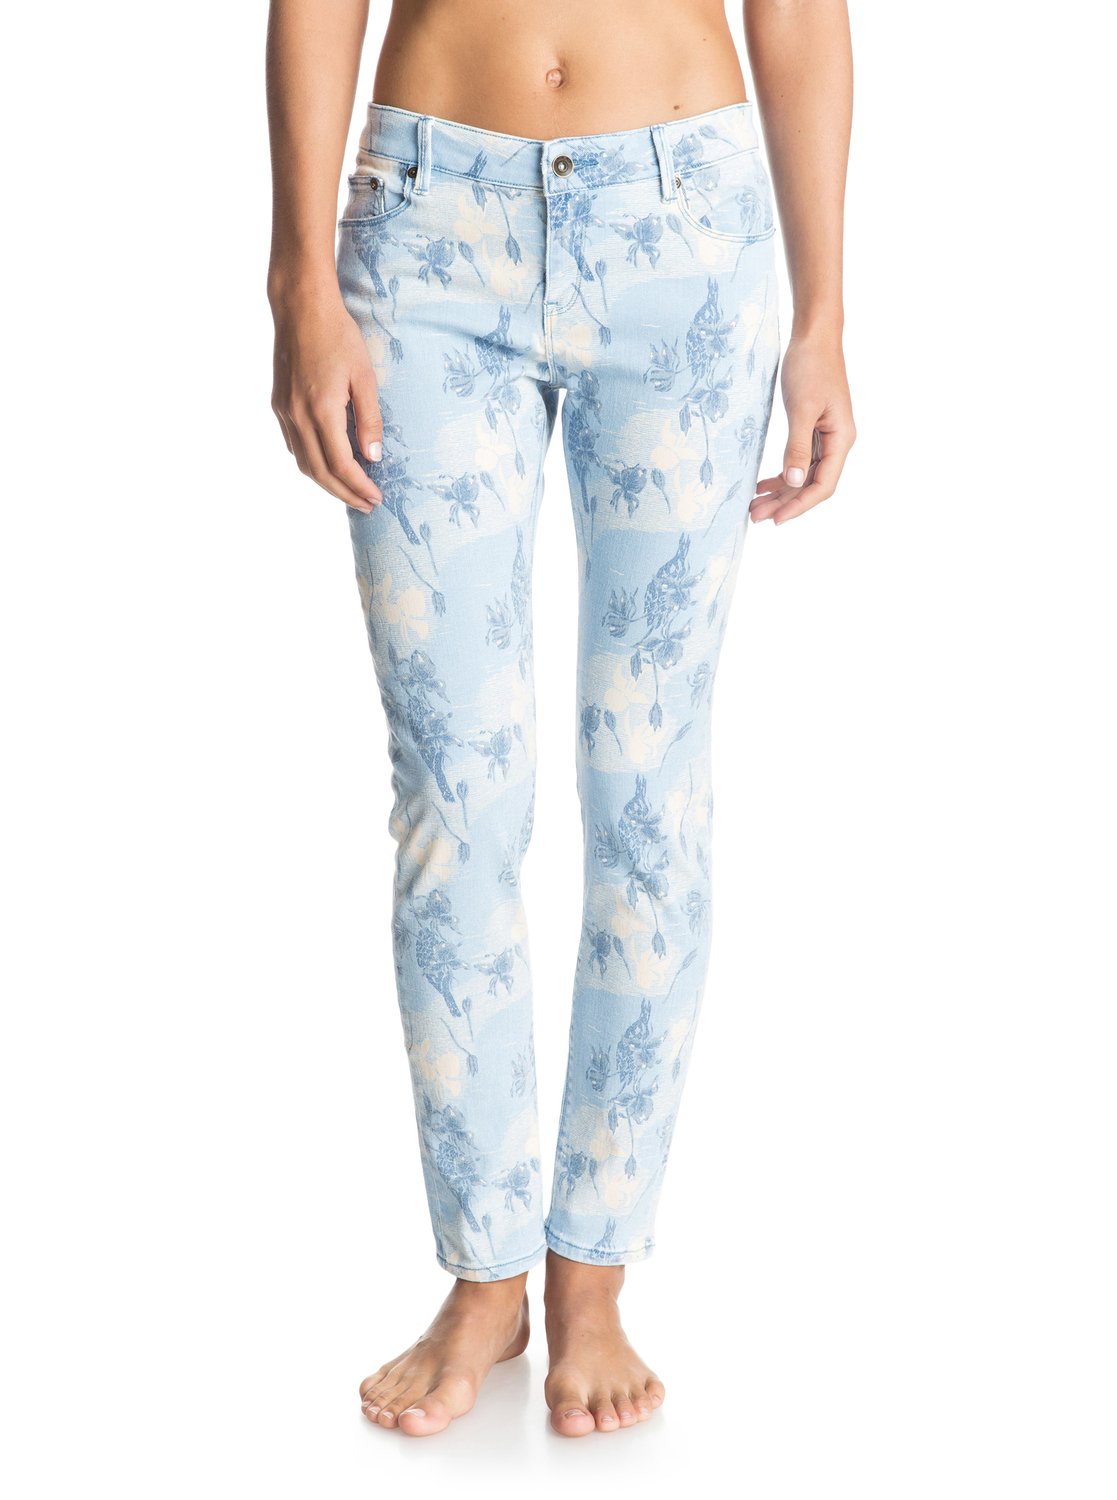 Suntrippers - Cropped Jeans - Roxy<br>